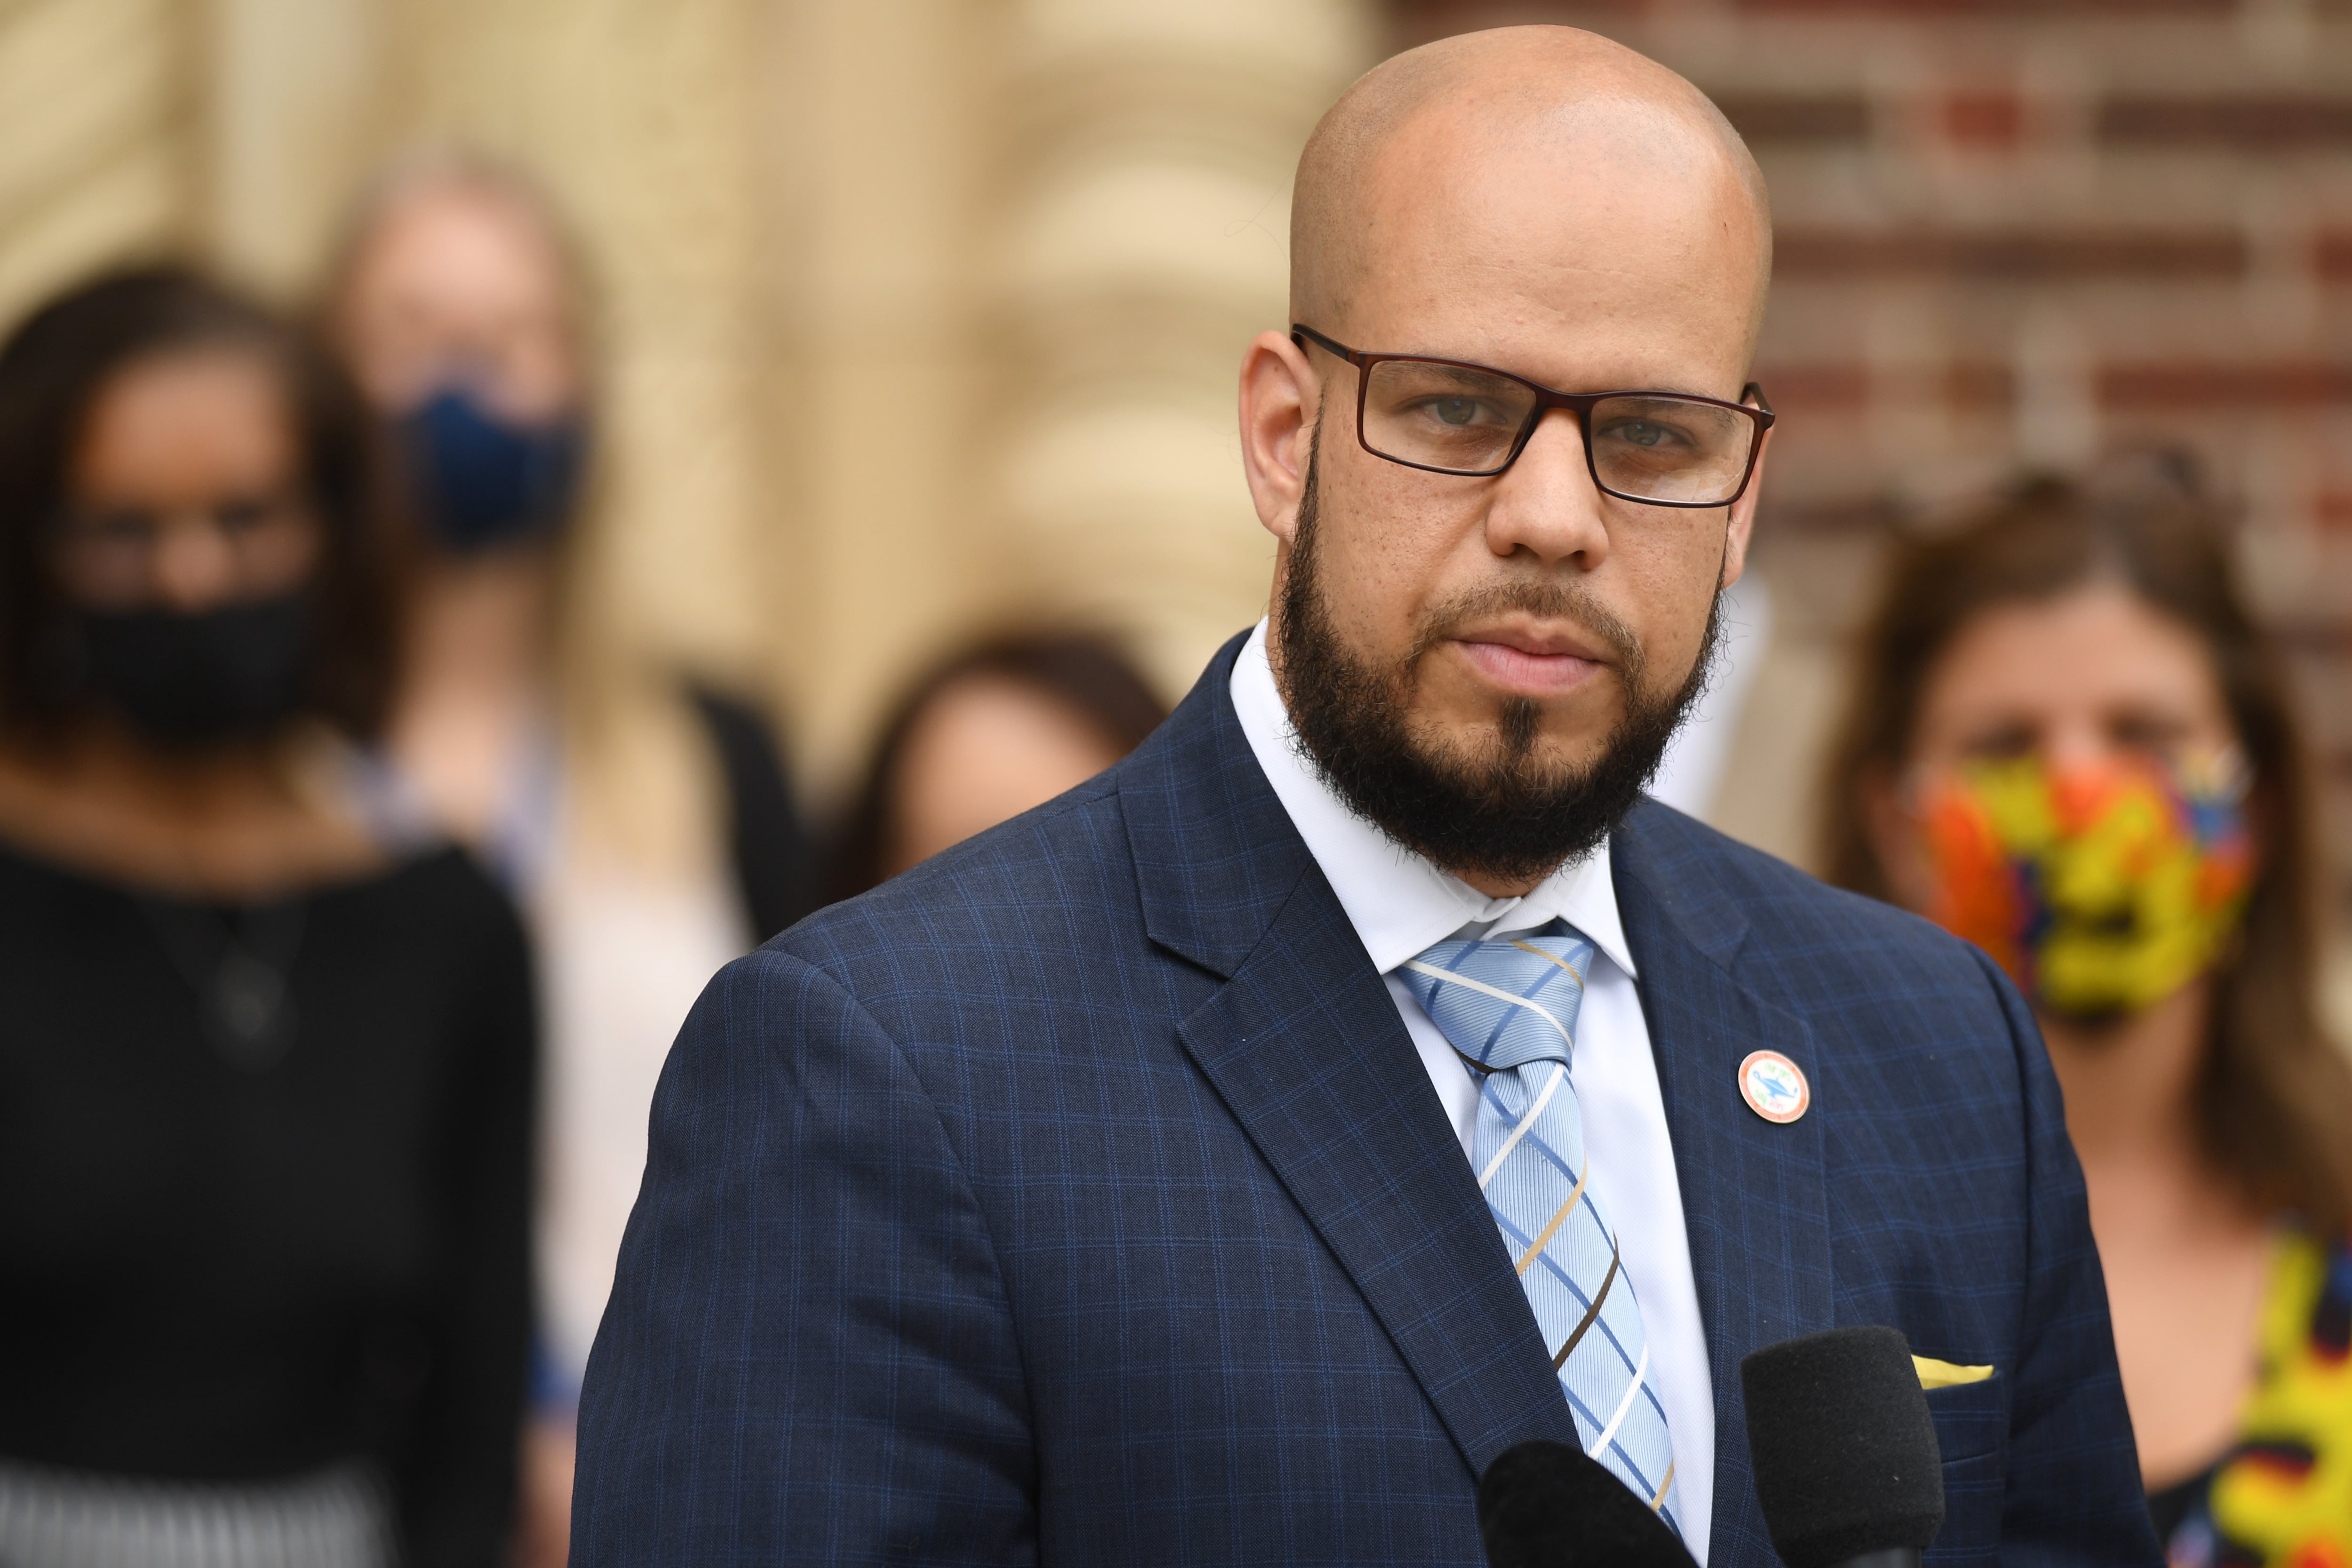 Dr. Alex Marrero, wearing a dark checkered suit jacket, white shirt, blue striped tie and a lapel pin.